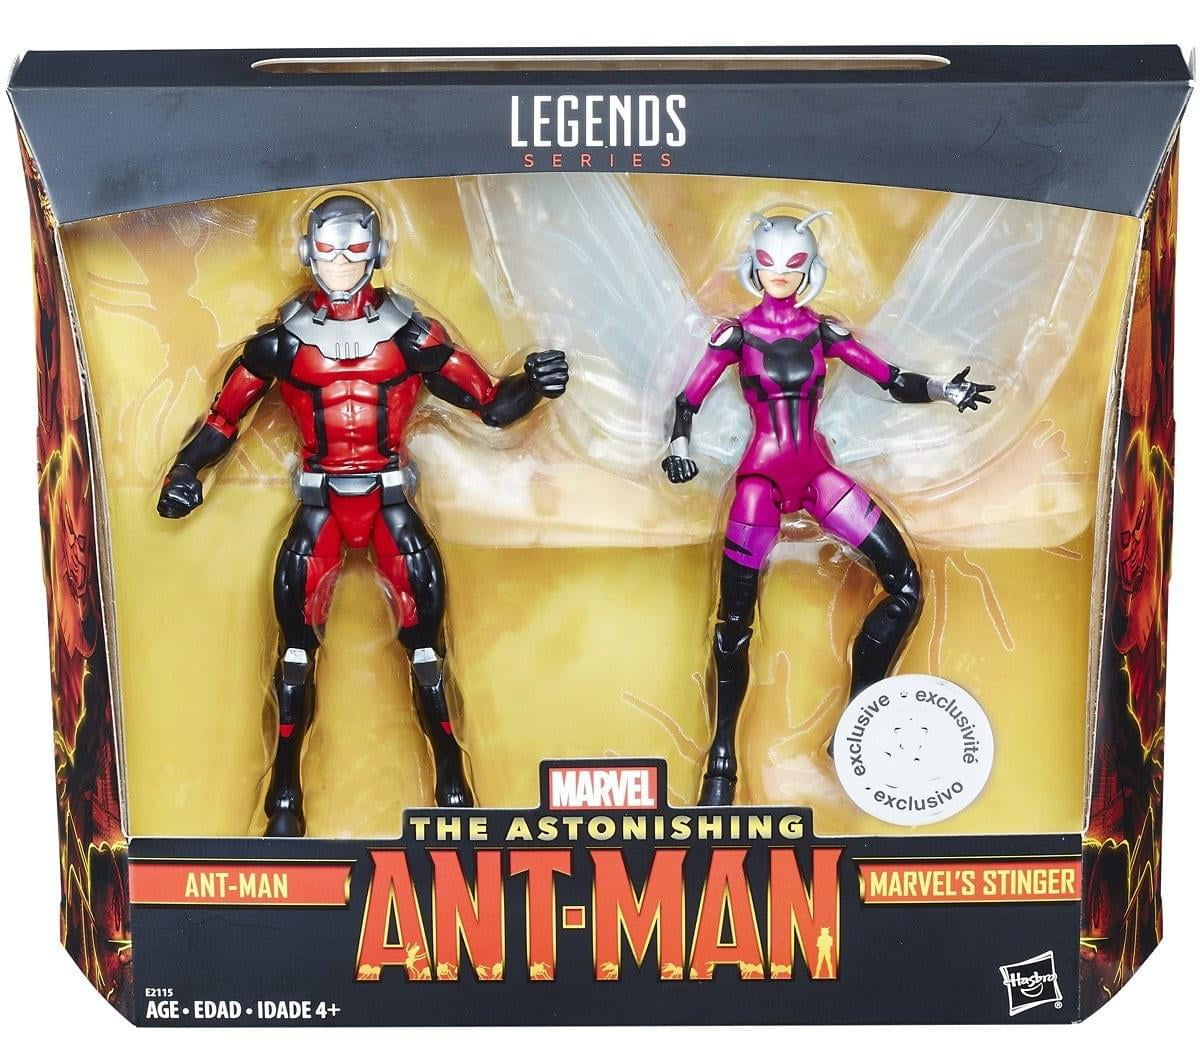 VARIANT ANT-MAN 6" INCH ca.16 cm HASBRO MARVEL LEGENDS ANT-MAN AND THE WASP 